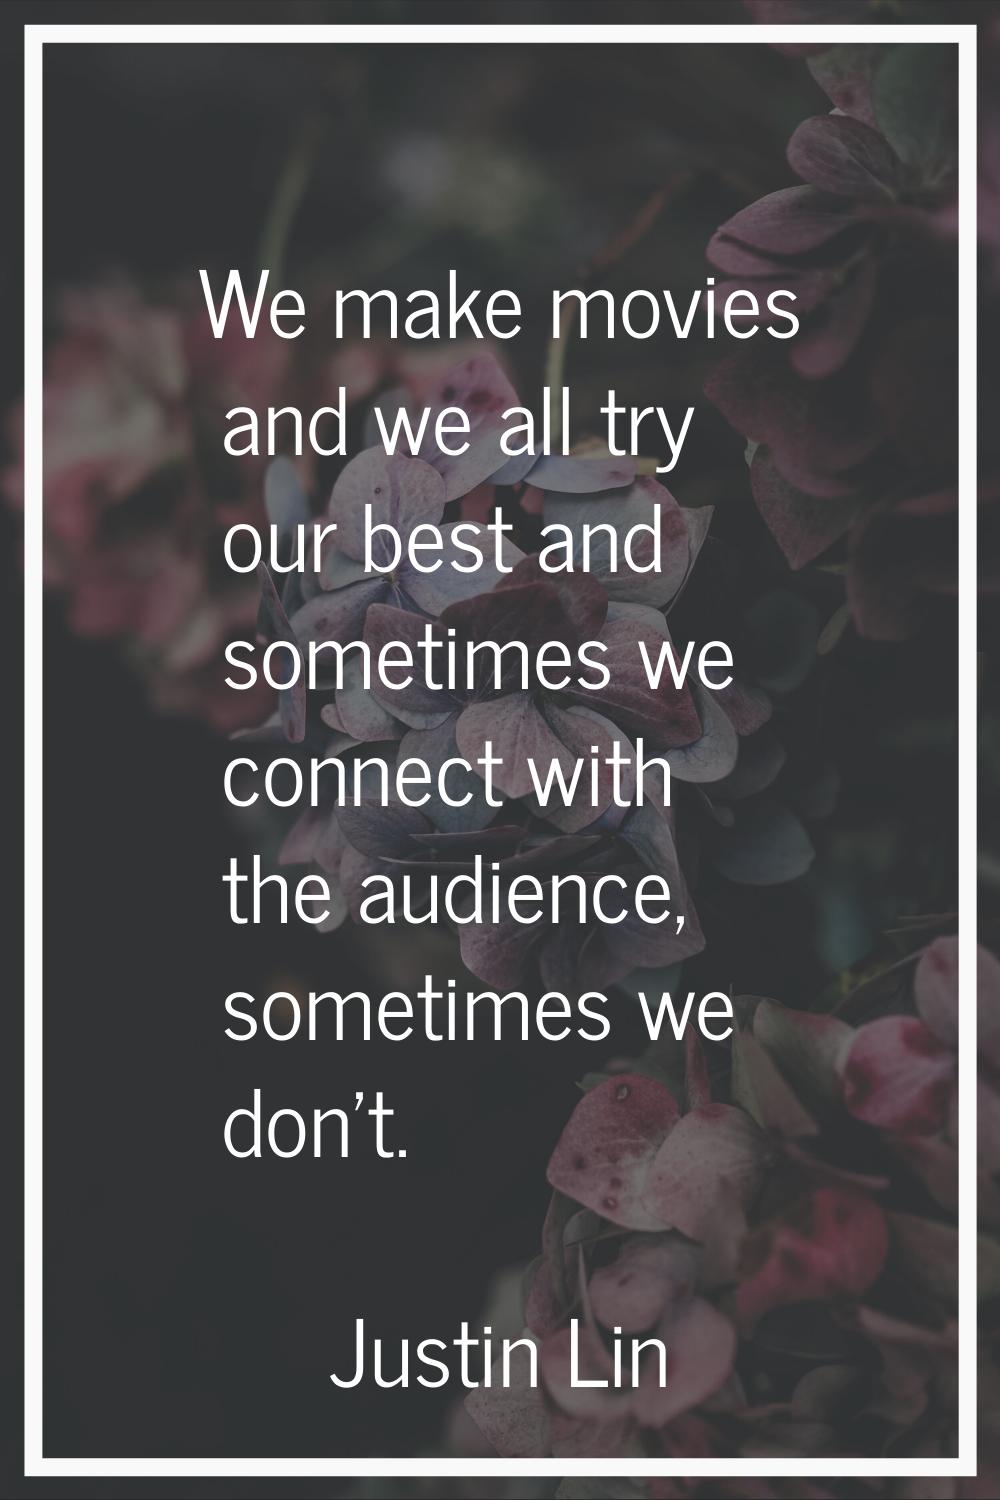 We make movies and we all try our best and sometimes we connect with the audience, sometimes we don